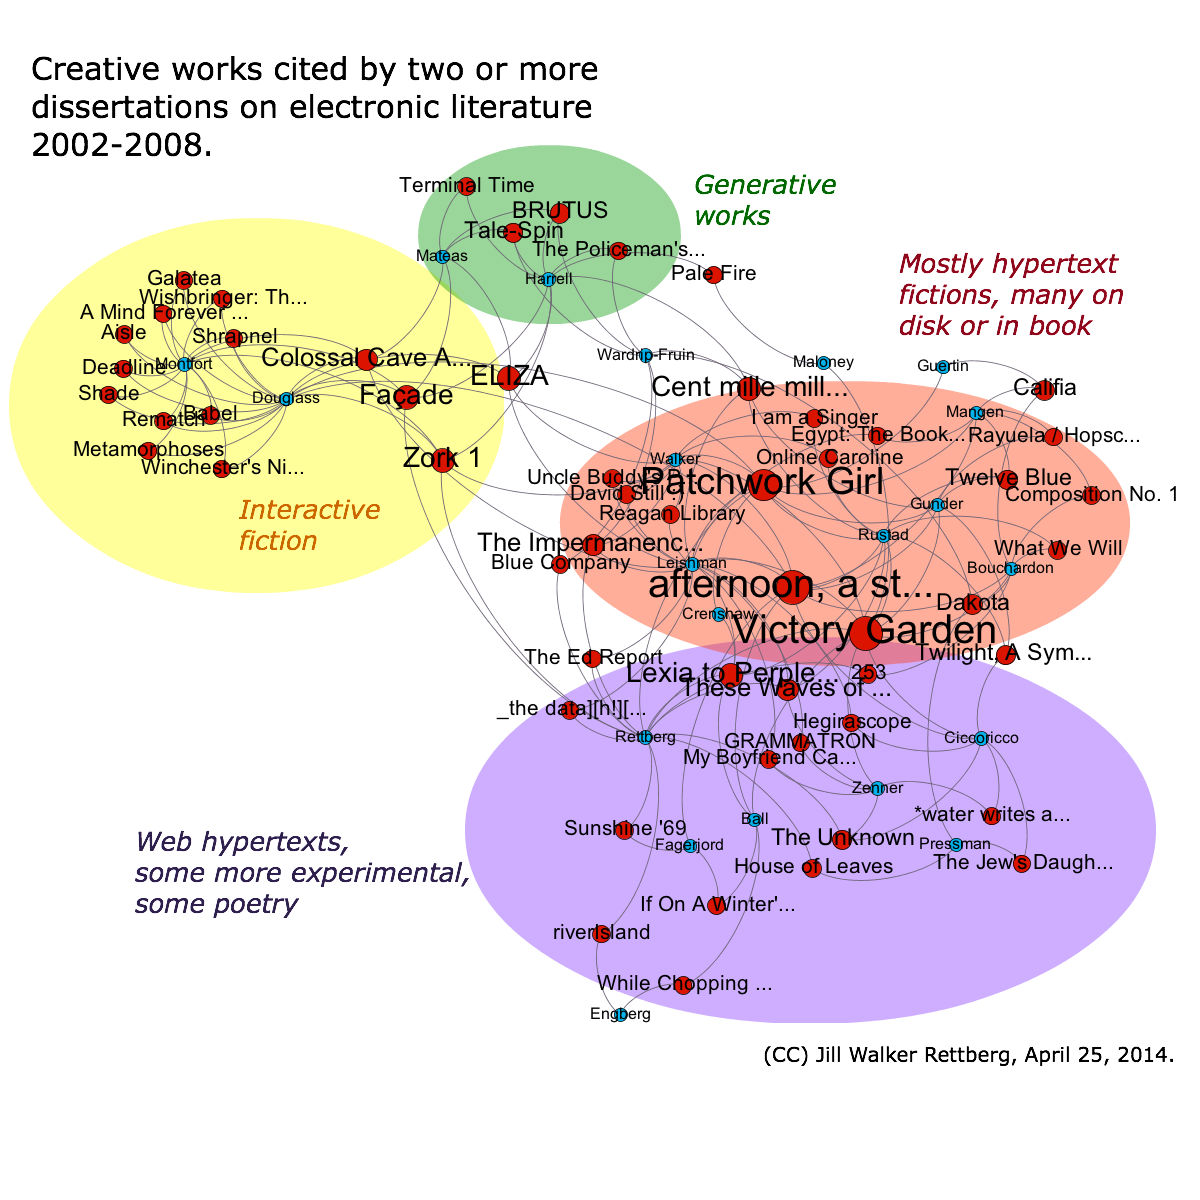 Network graph showing creative works cited by two or more dissertations on electronic literature between 2002 and 2008.